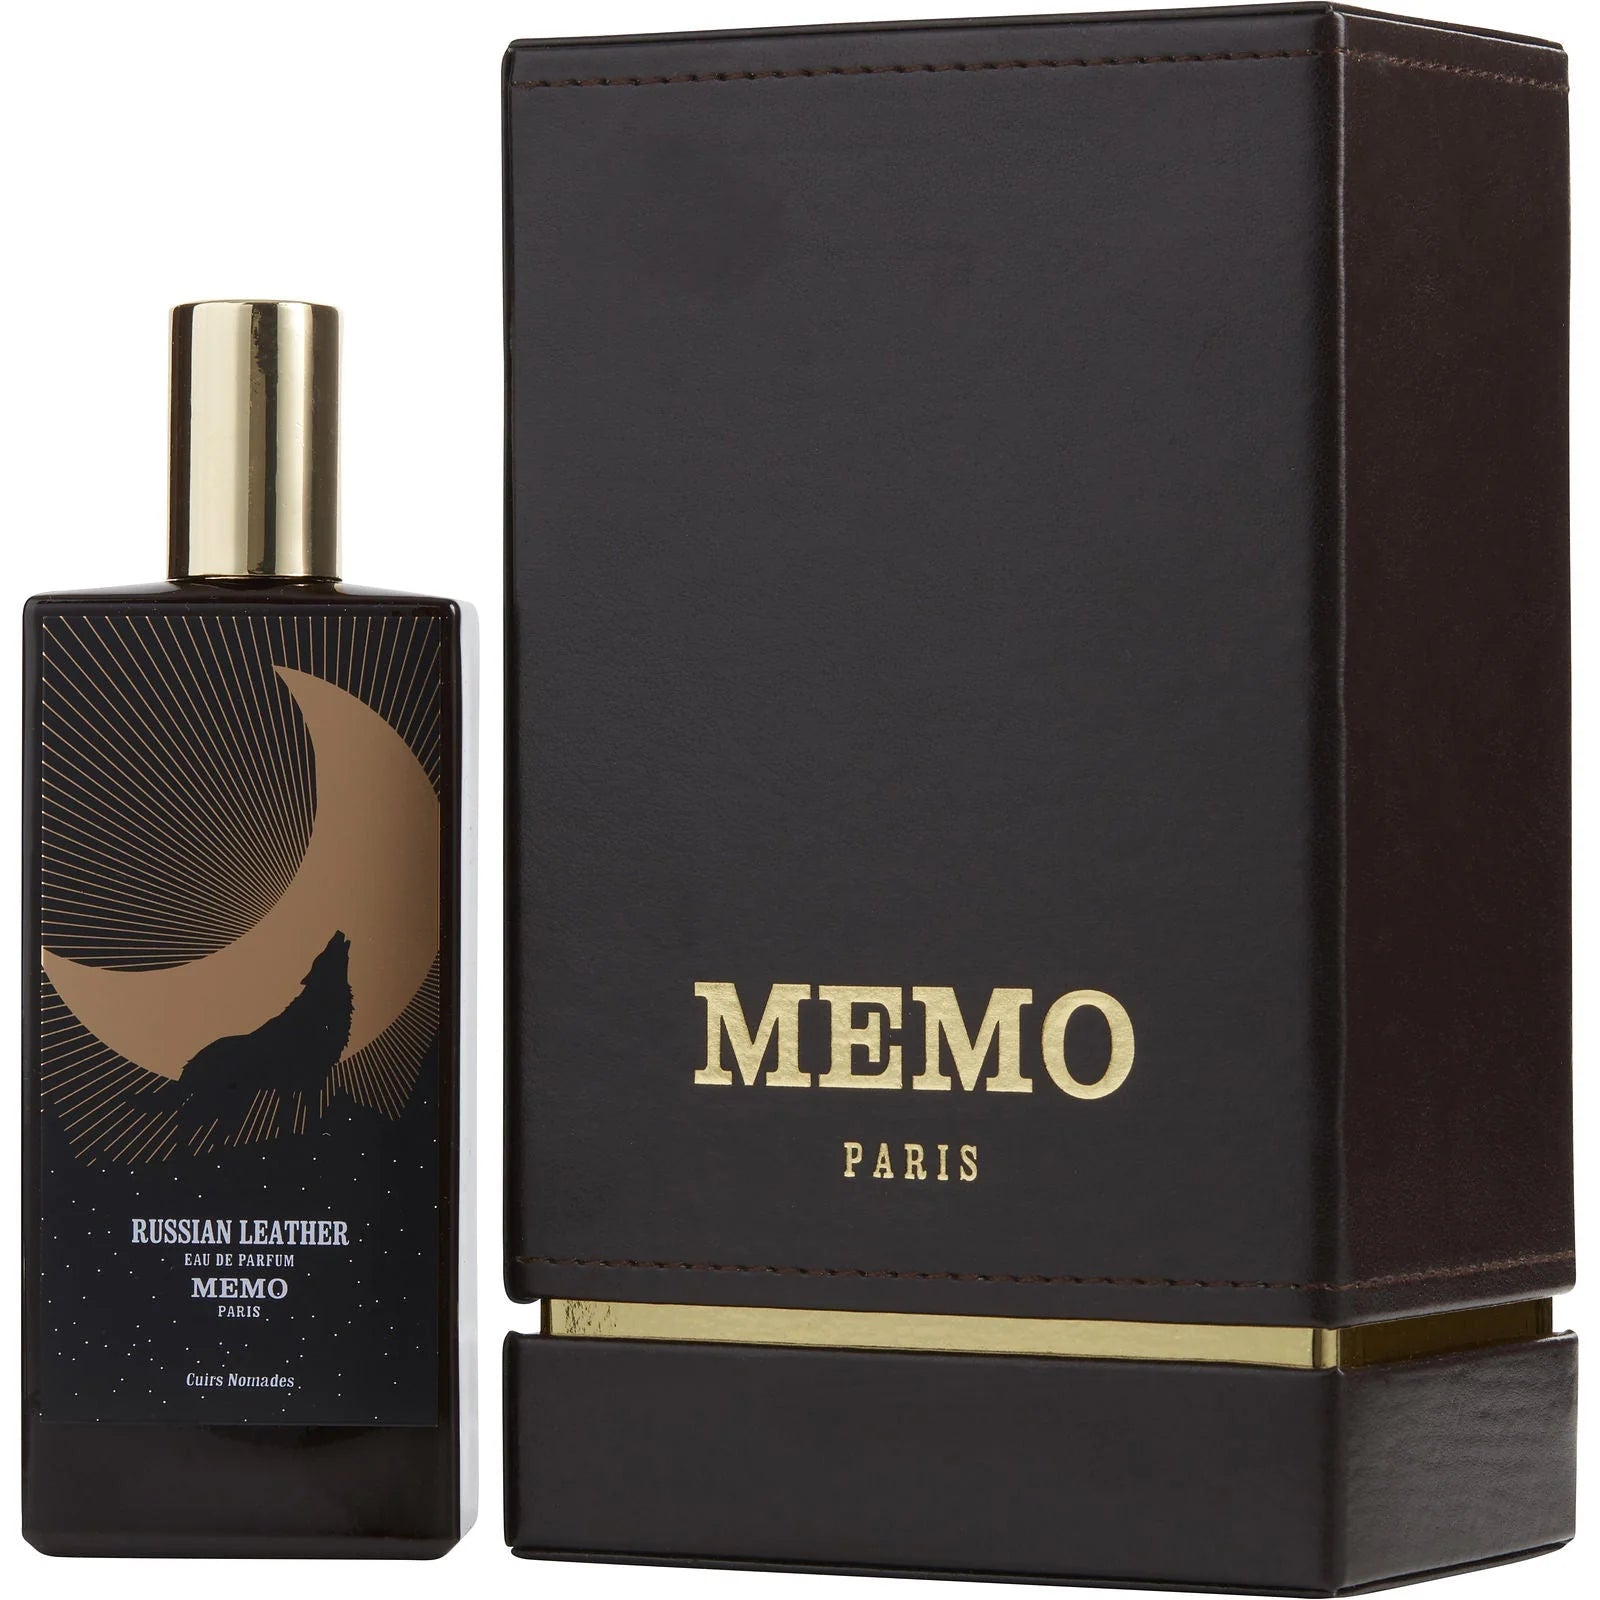 Memo Cuirs Nomades Russian Leather EDP | My Perfume Shop Australia